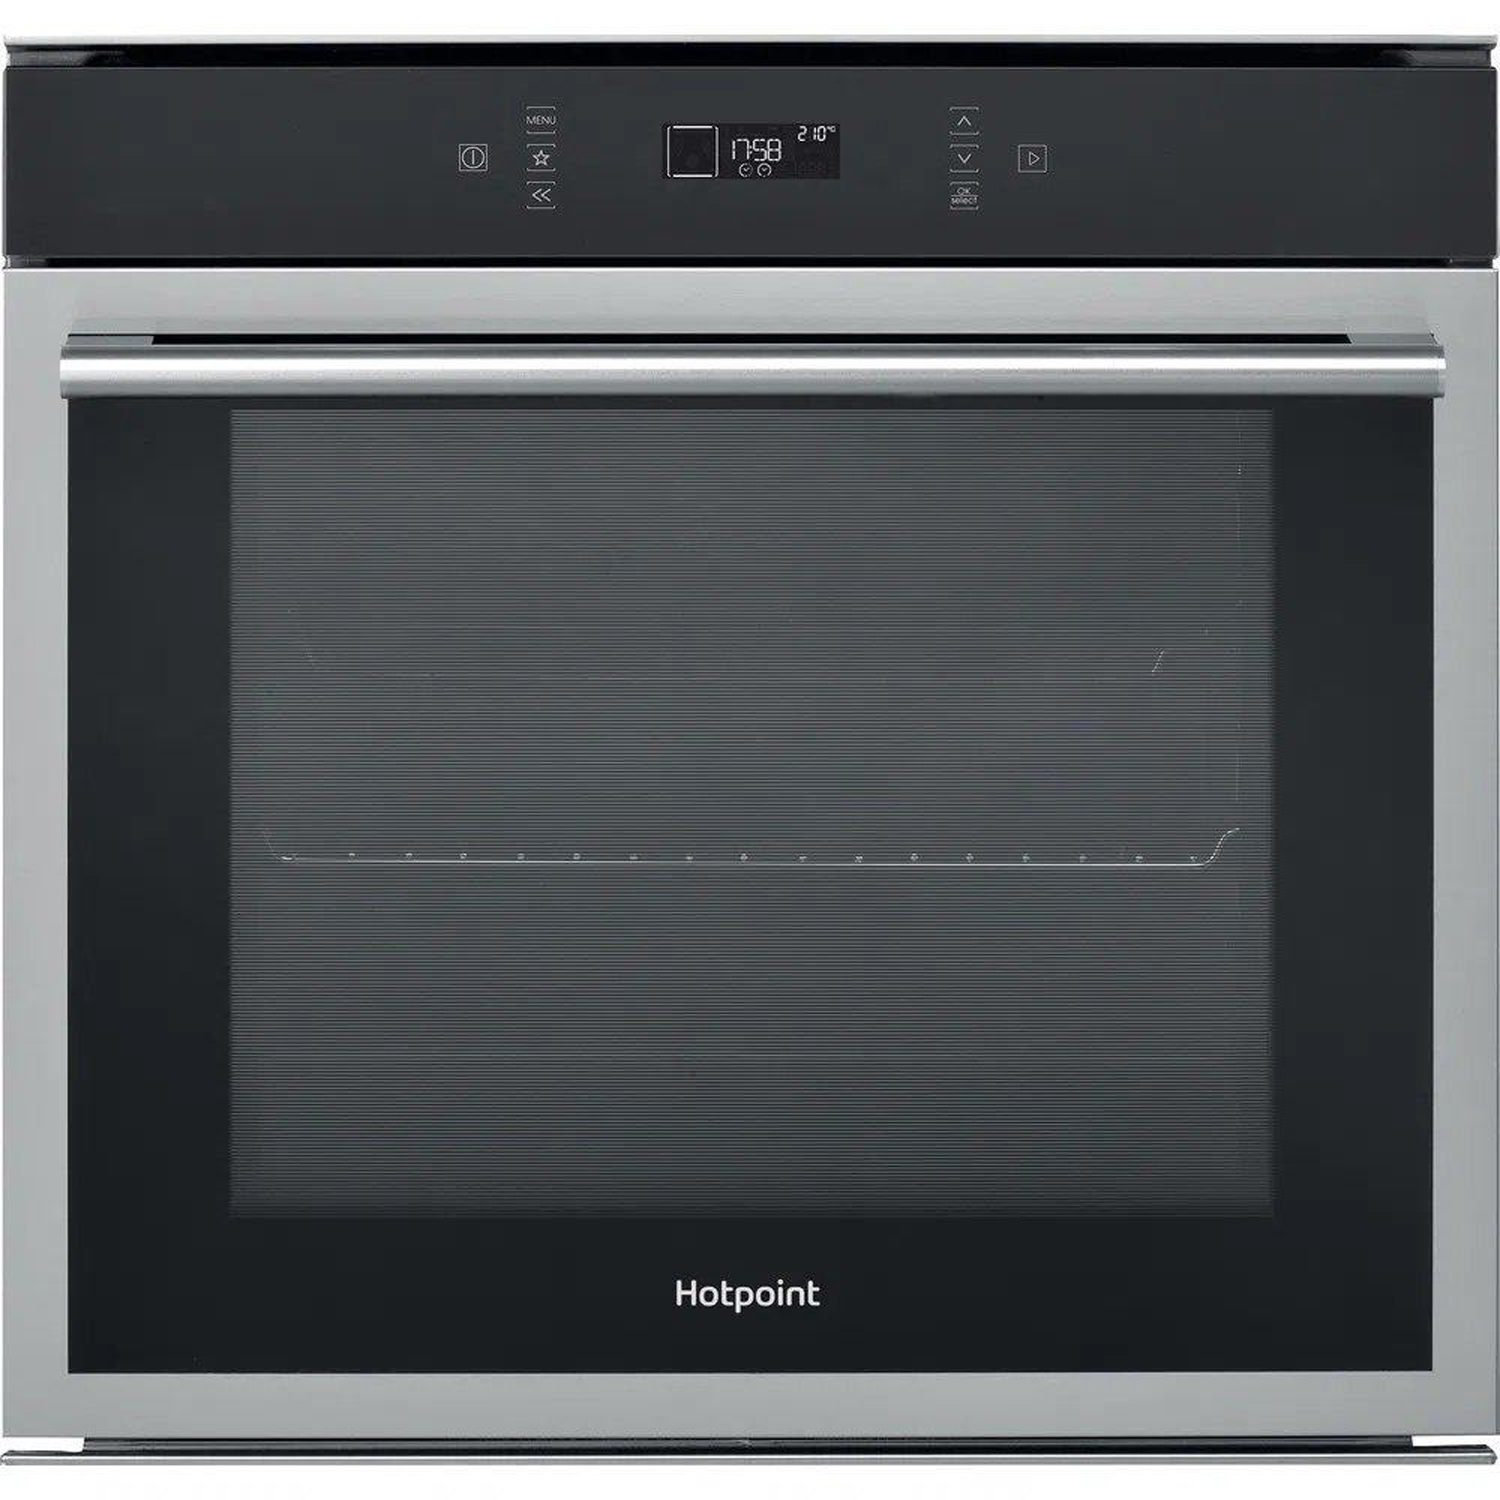 Hotpoint SI6874SHIX built-in electric oven